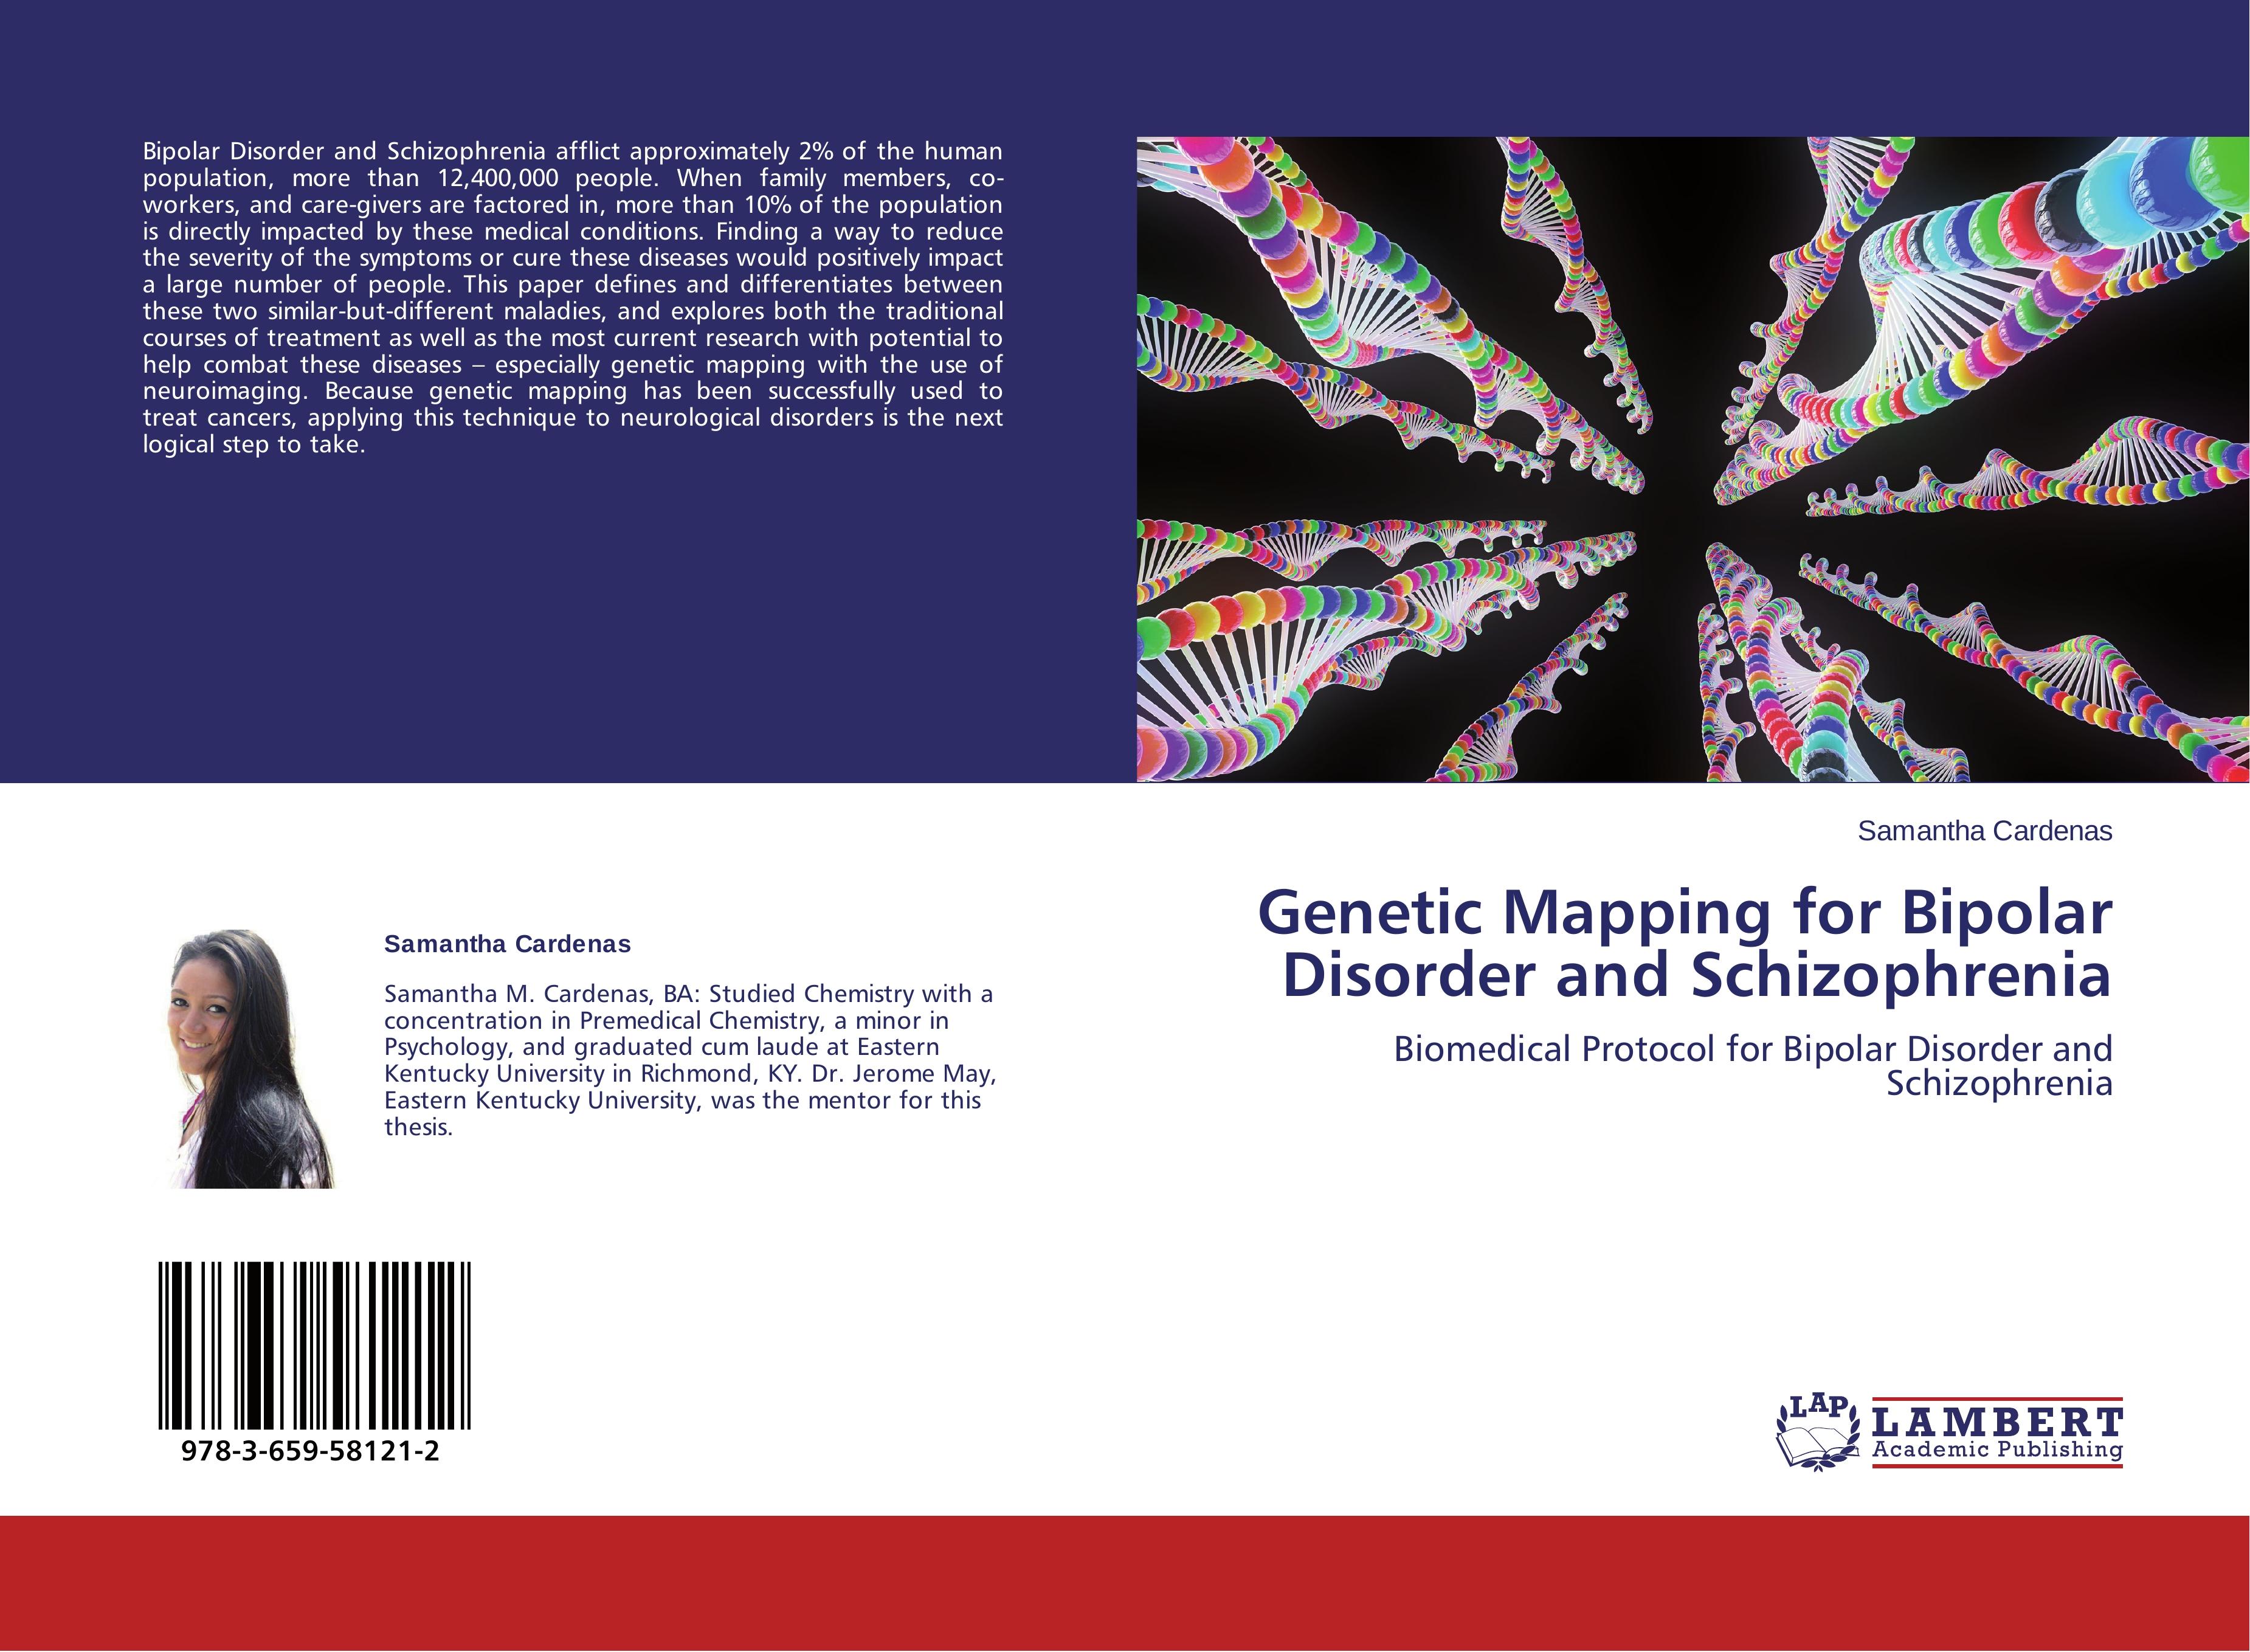 Genetic Mapping for Bipolar Disorder and Schizophrenia | Biomedical Protocol for Bipolar Disorder and Schizophrenia | Samantha Cardenas | Taschenbuch | Paperback | 52 S. | Englisch | 2014 - Cardenas, Samantha